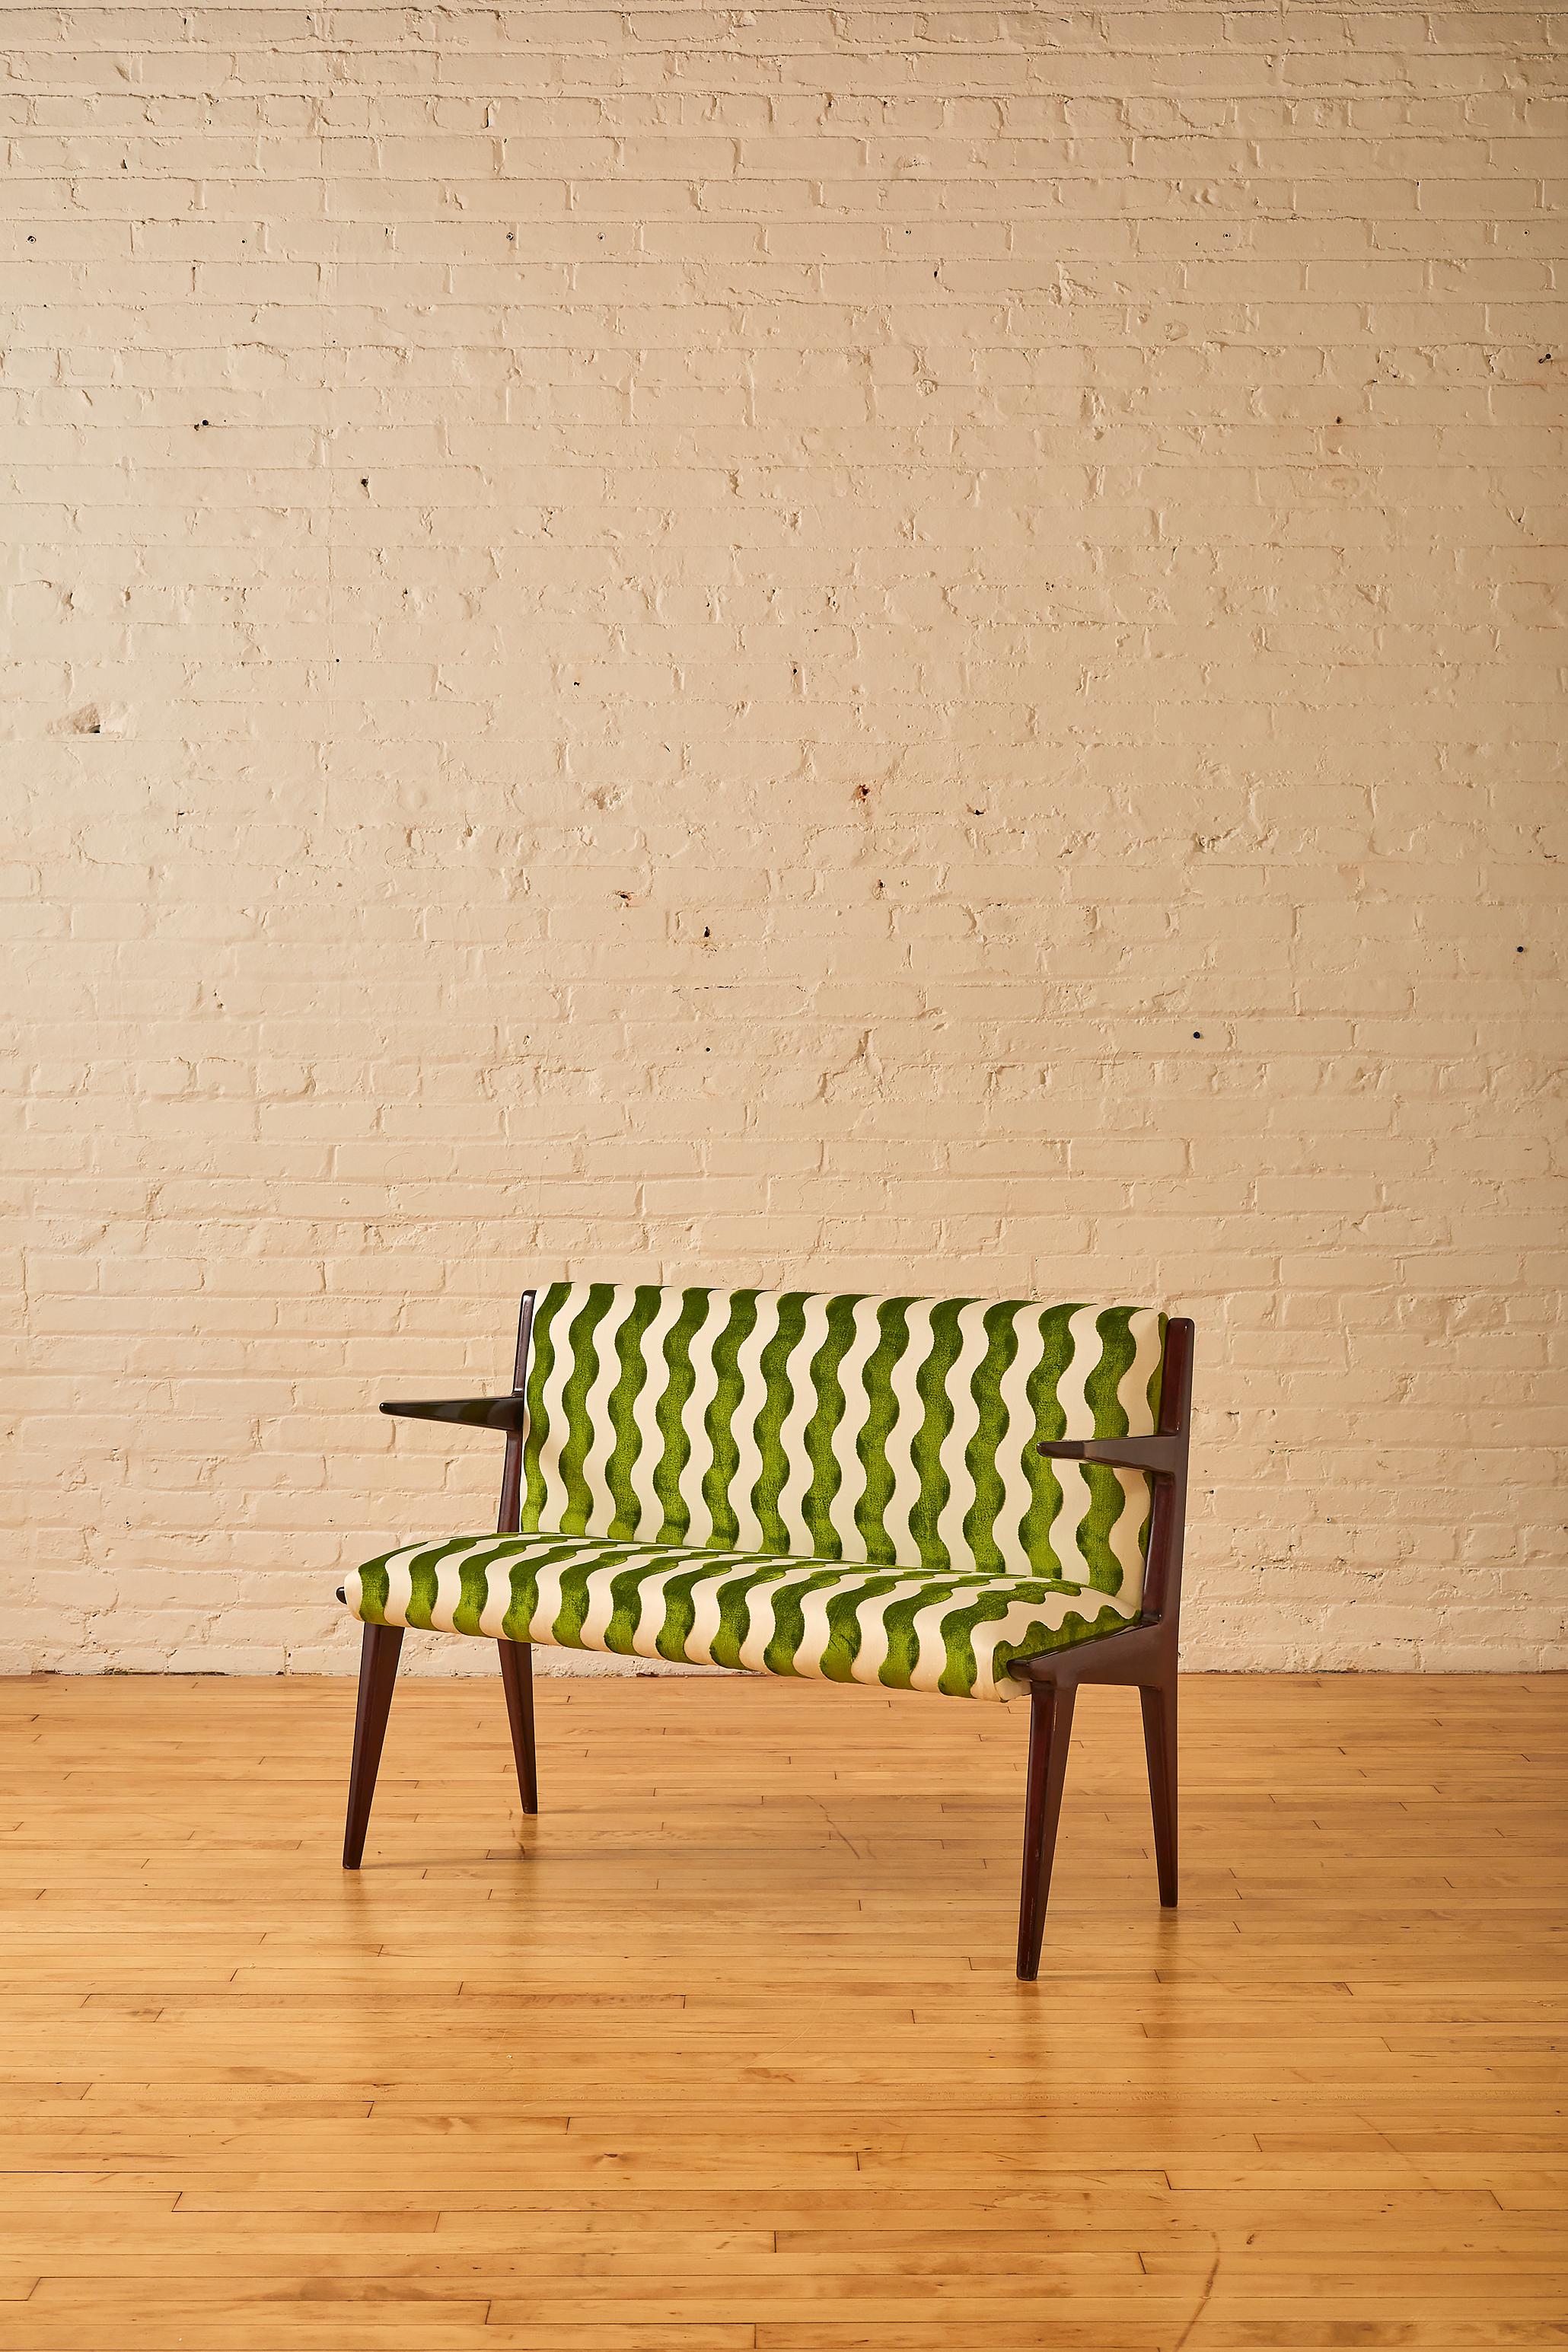 1960's Italian Modern bench by Fede Cheti. Reupholstered with Schumacher wavy fabric. 

